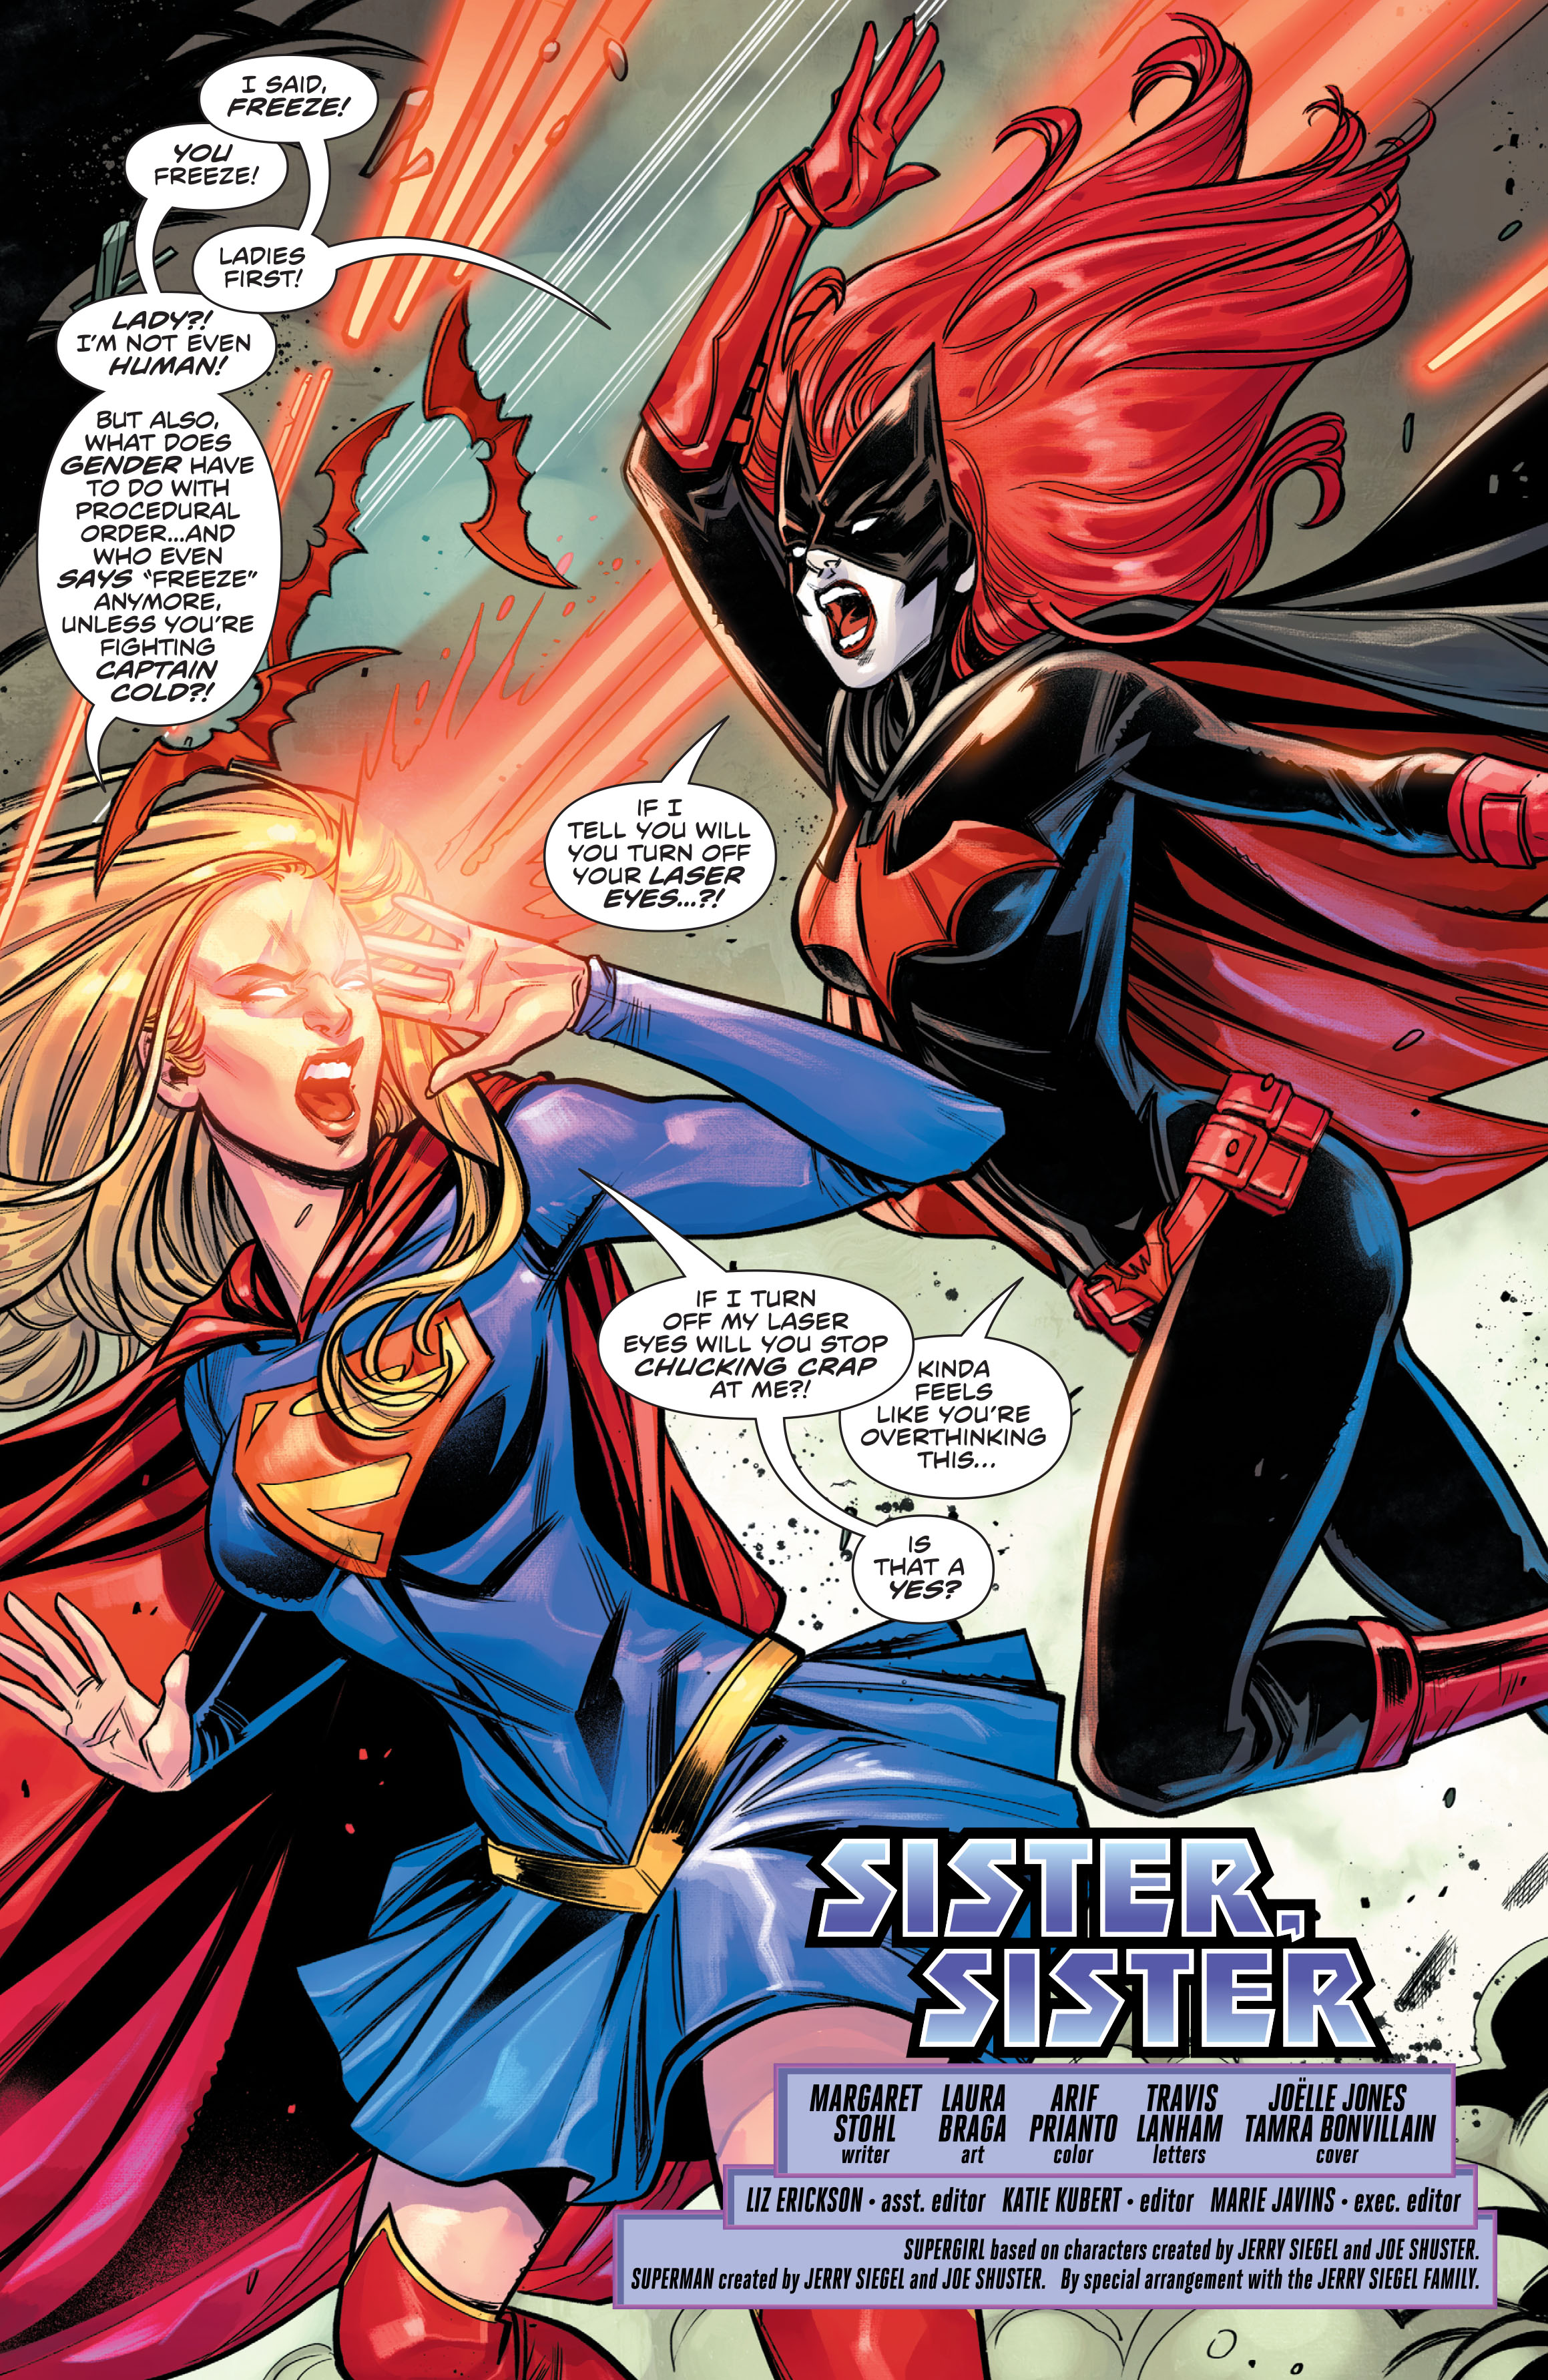 World's Finest: Batwoman and Supergirl (2020-): Chapter 1 - Page 4